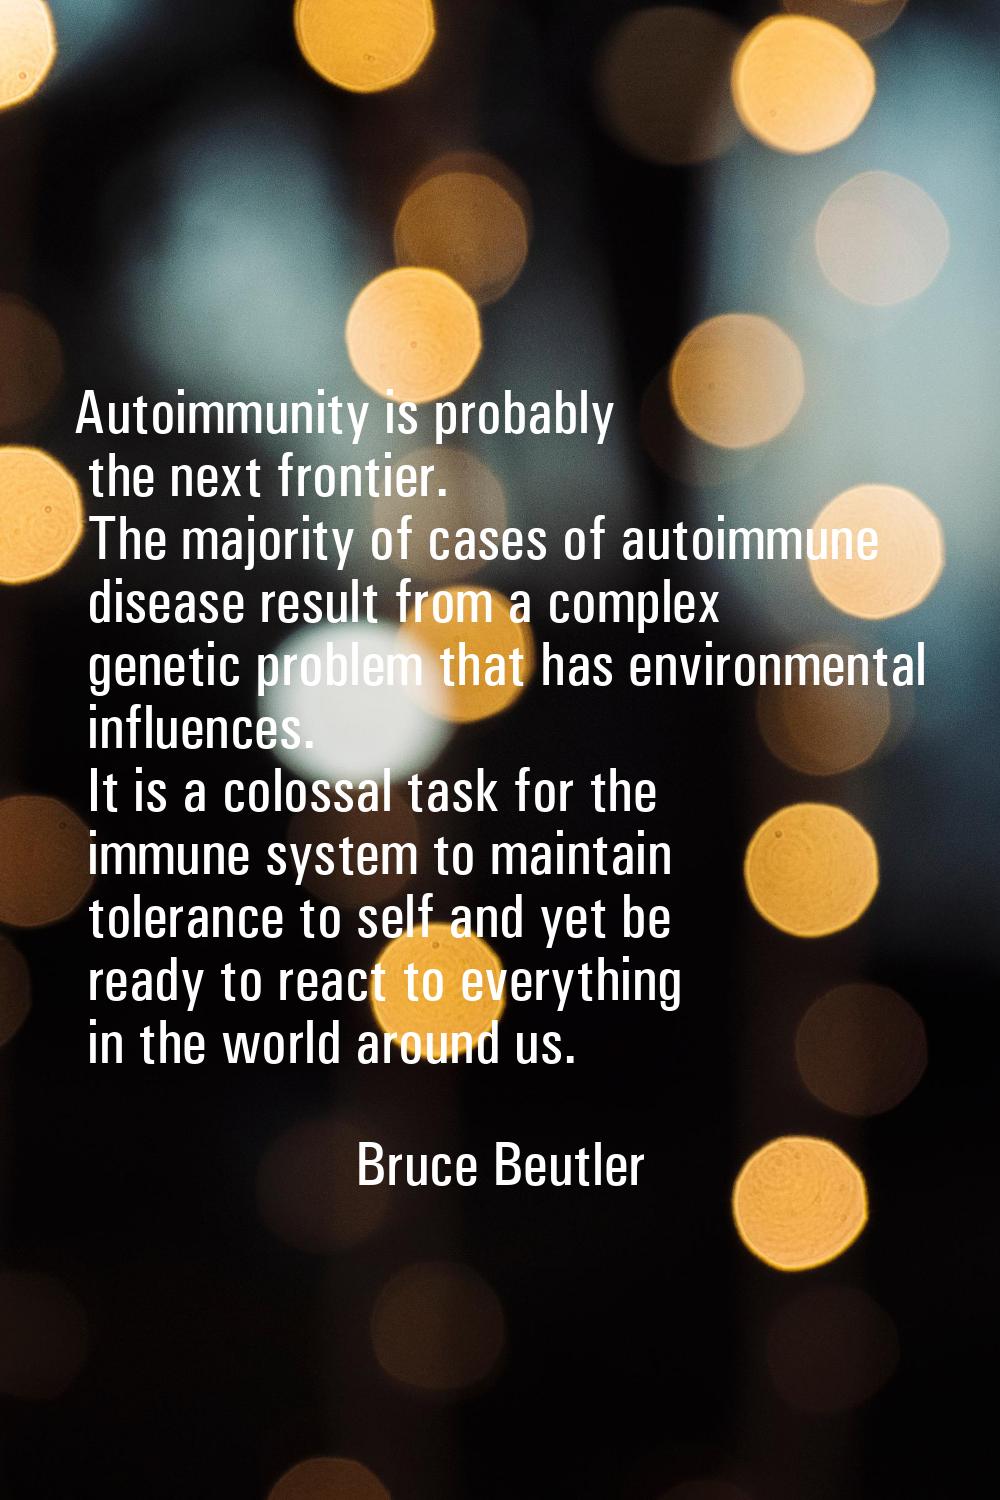 Autoimmunity is probably the next frontier. The majority of cases of autoimmune disease result from